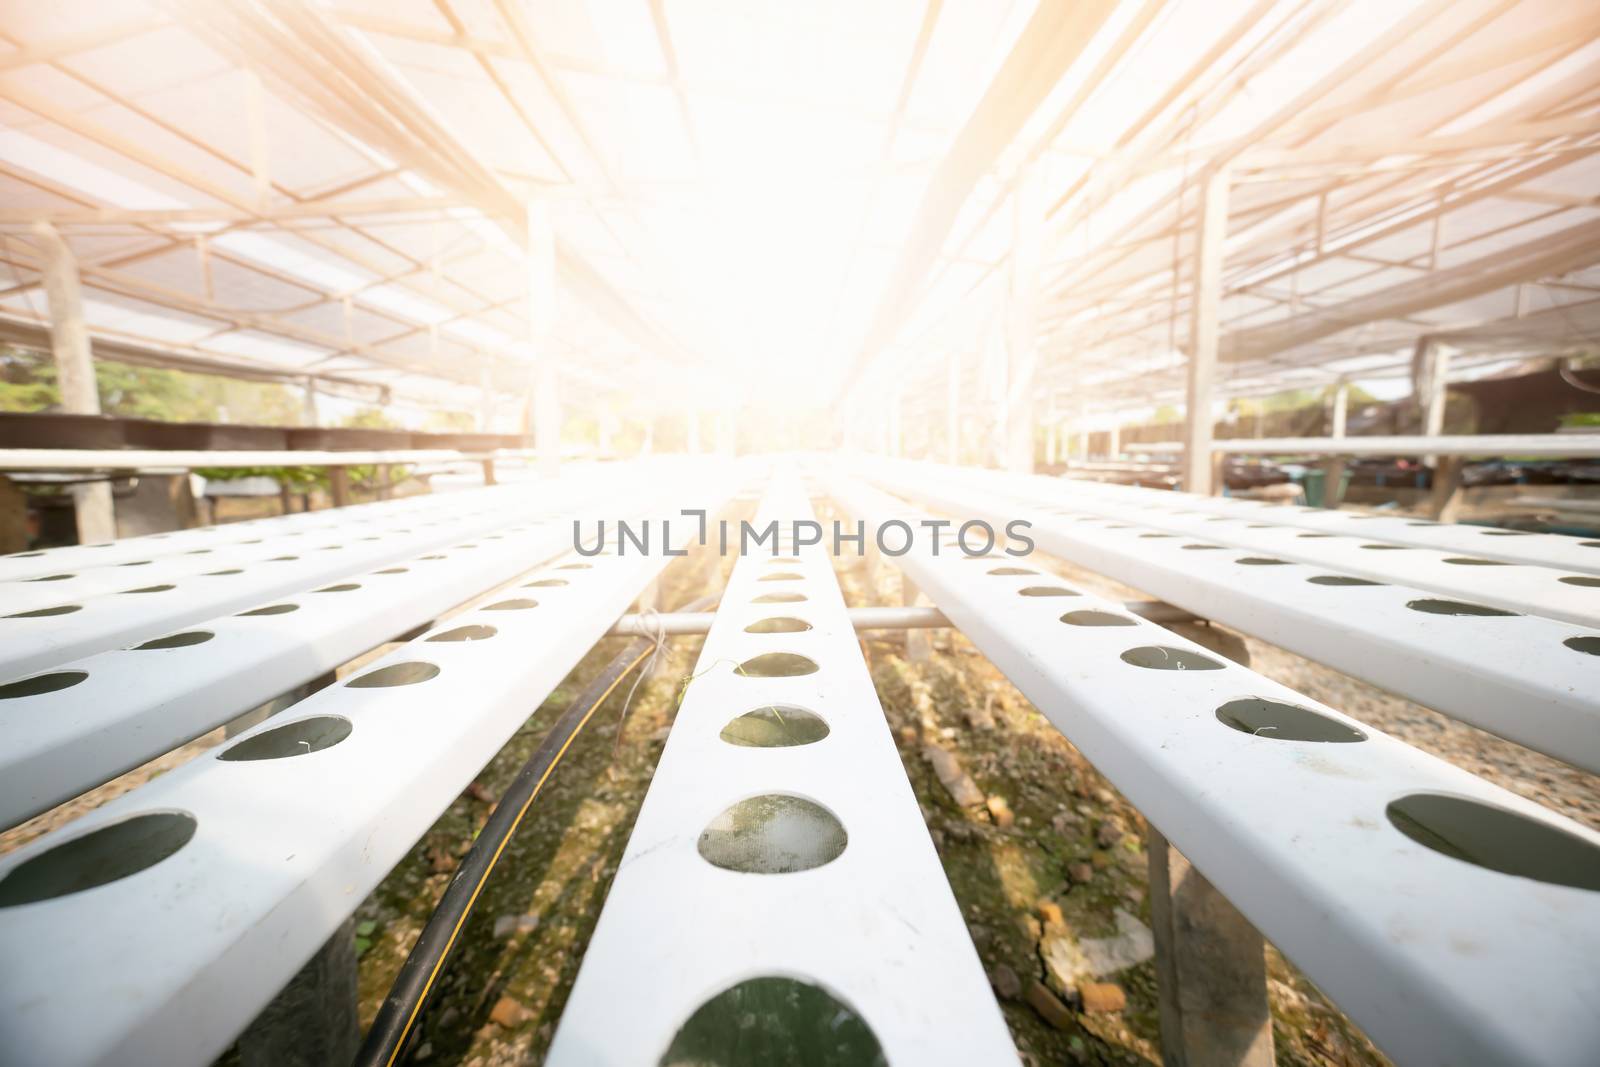 Organic vegetable growing plots.  Industrial concept by Buttus_casso